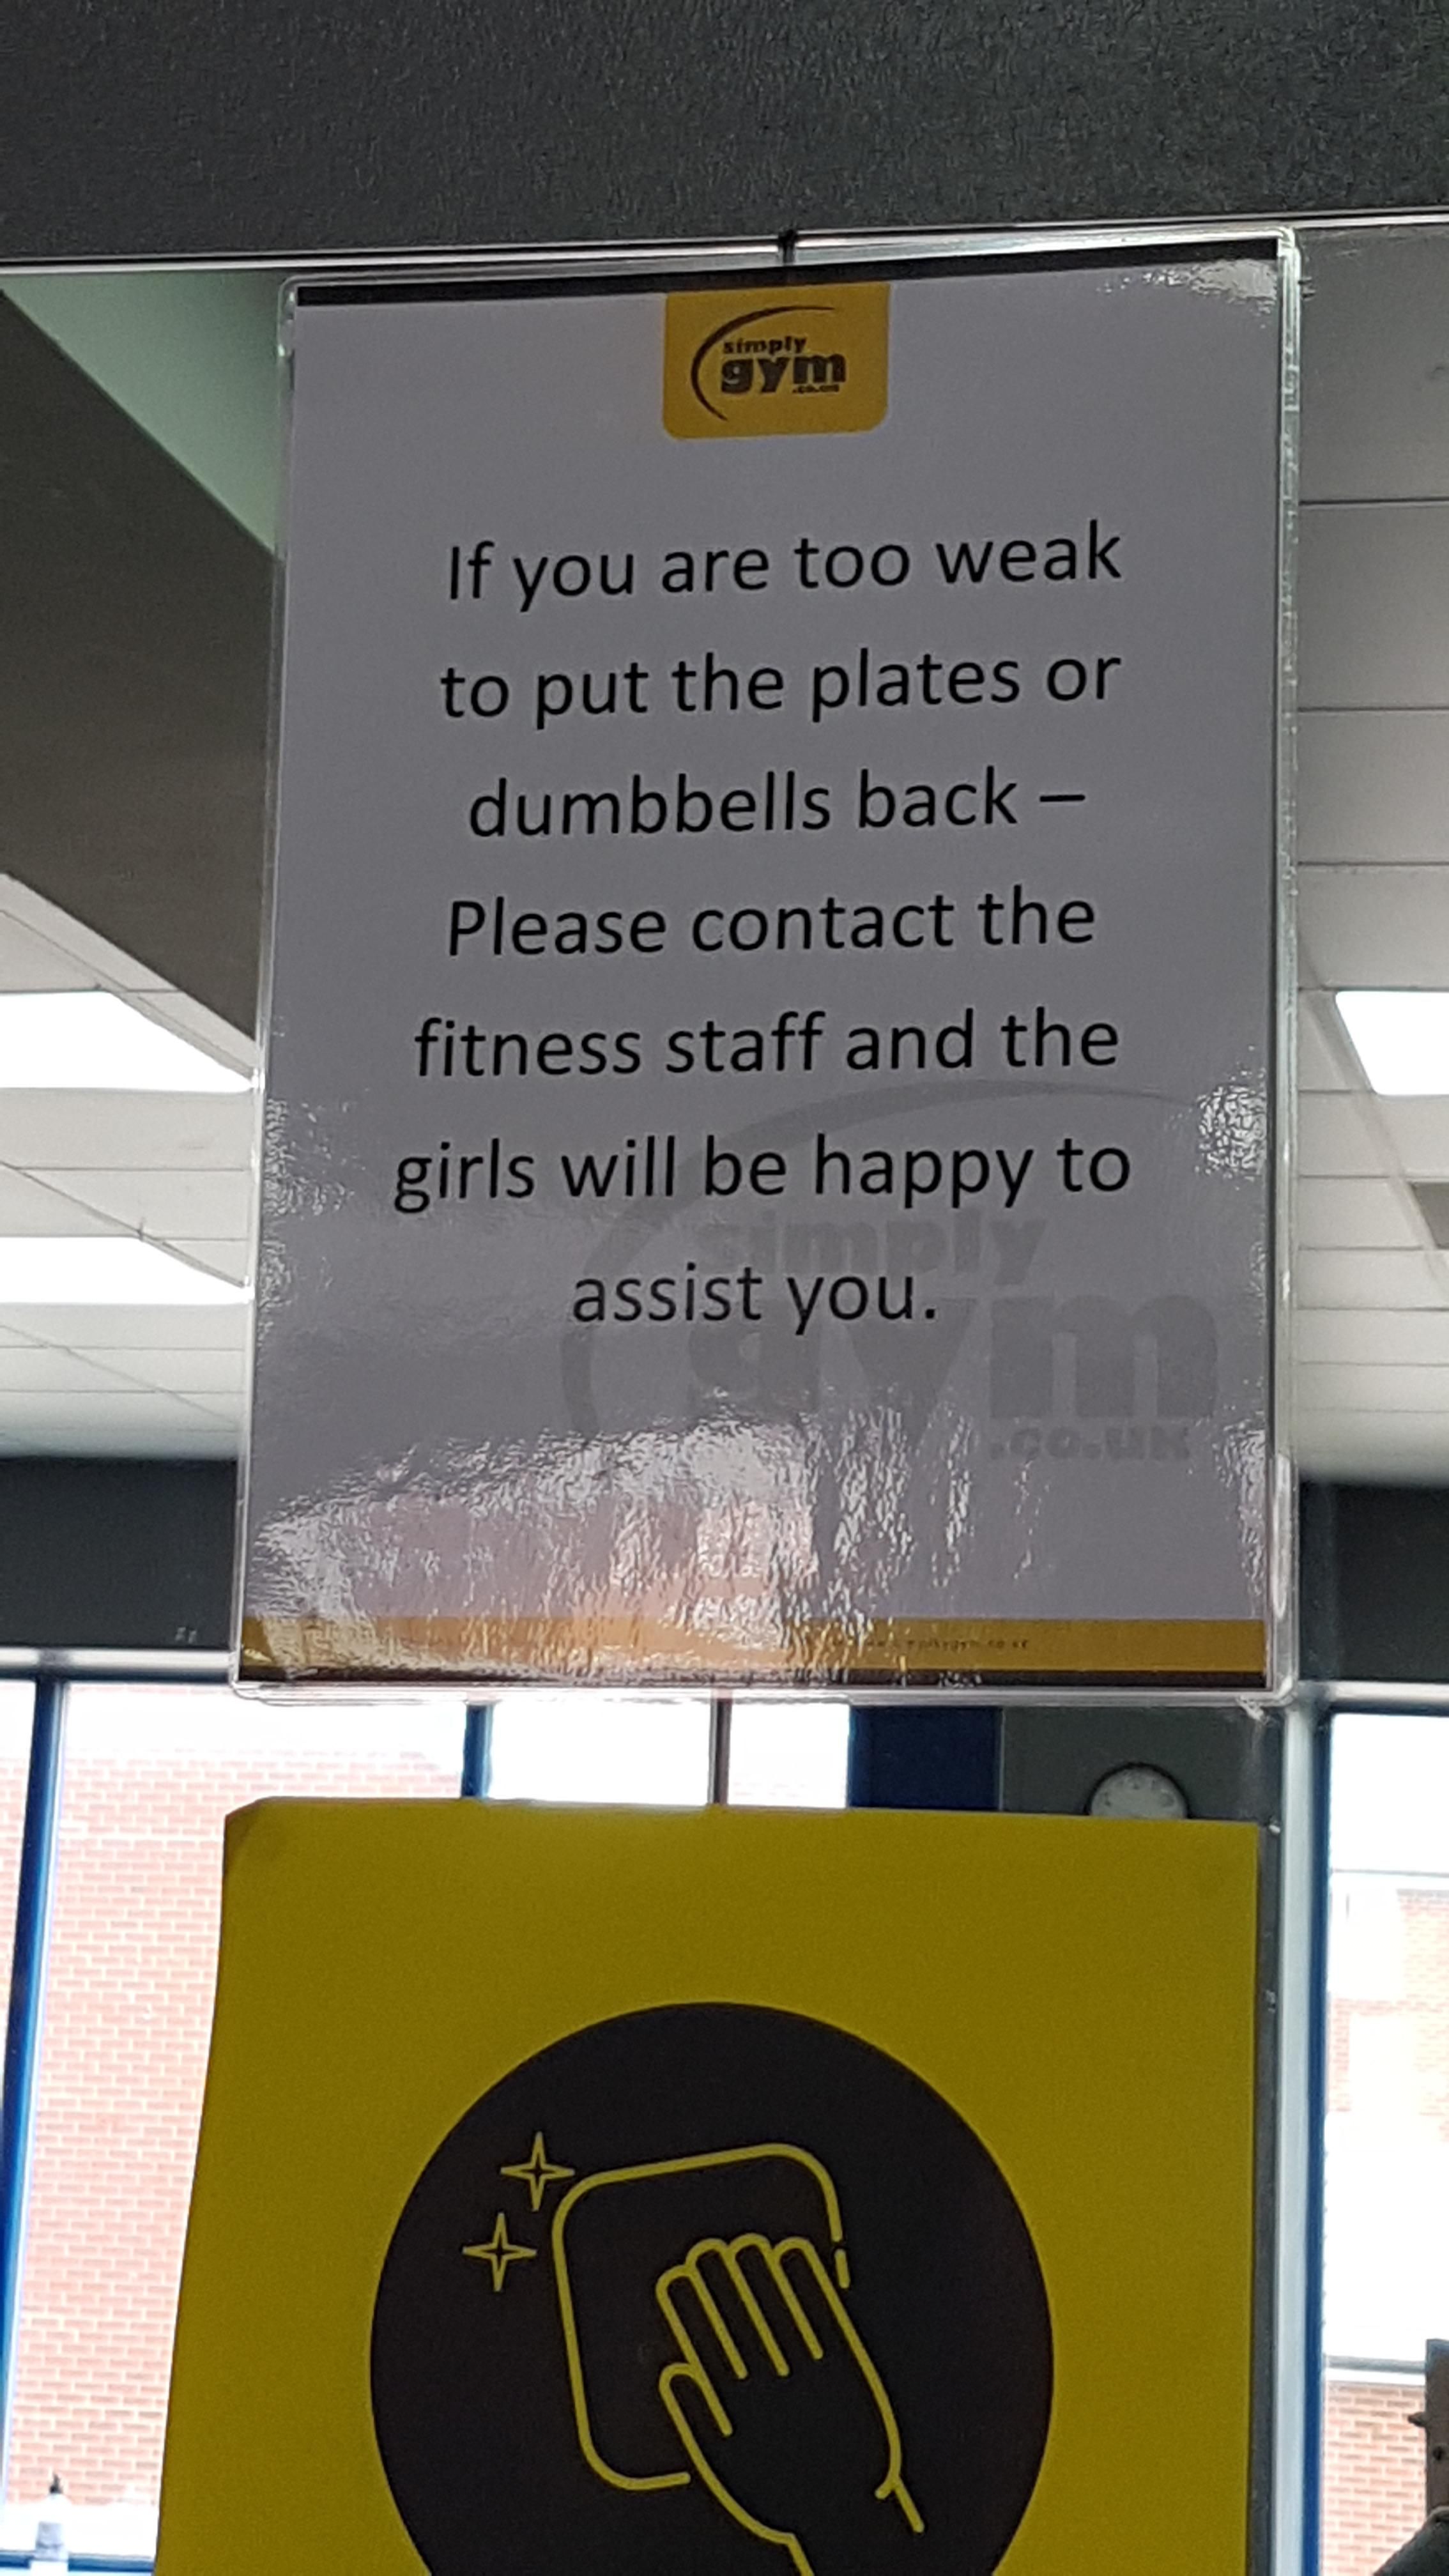 The gym I go to has a suggestion for lazy people